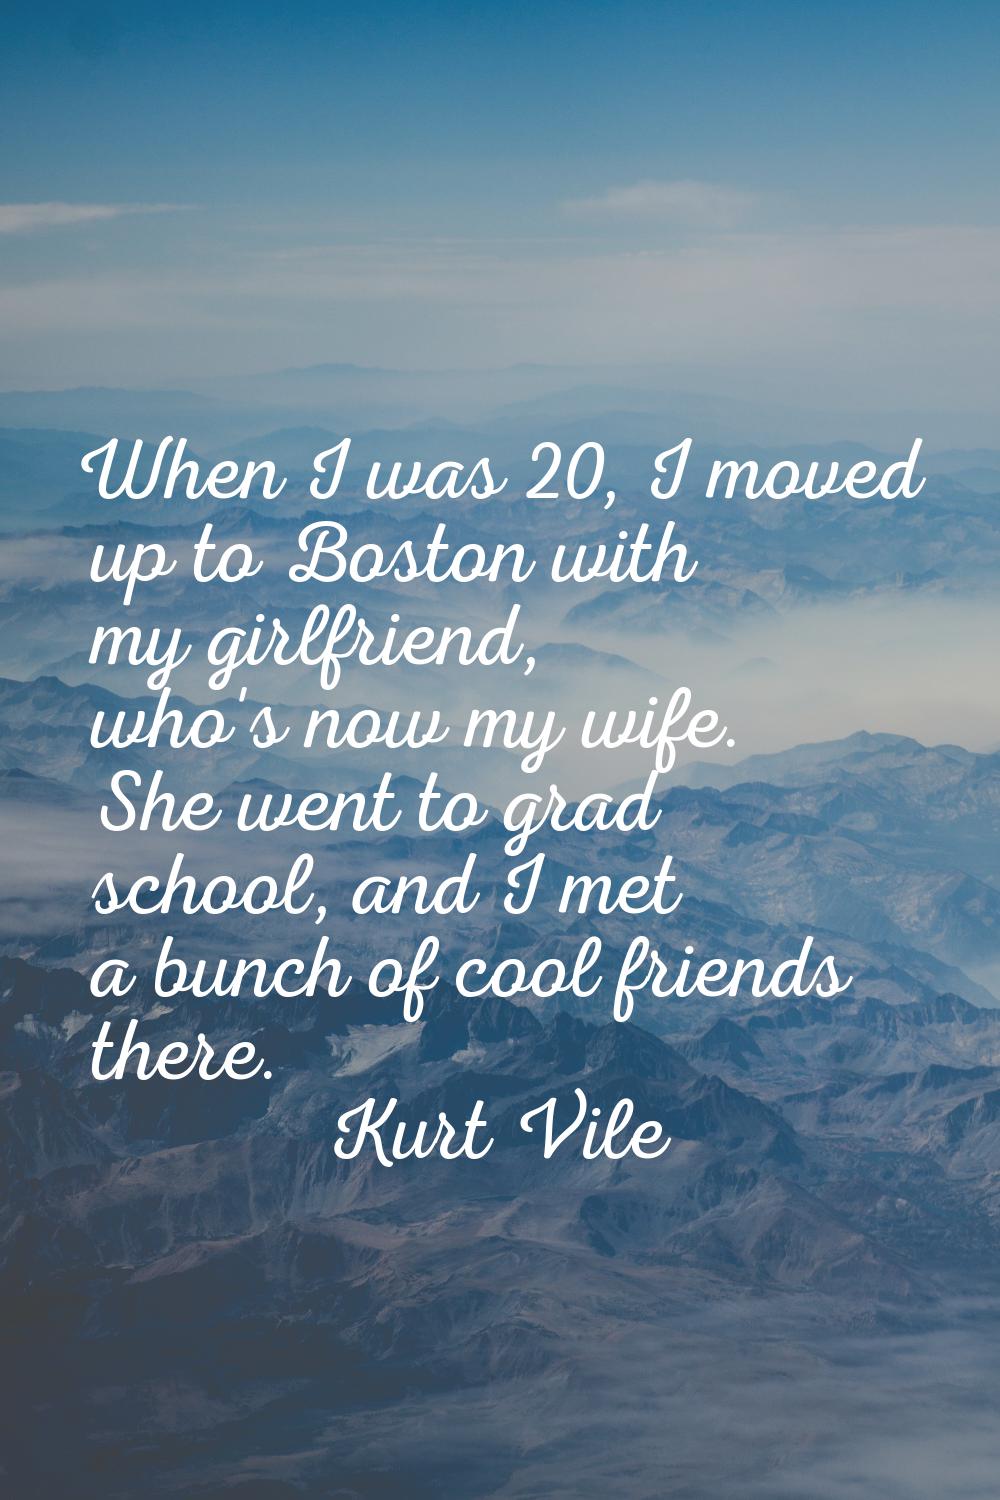 When I was 20, I moved up to Boston with my girlfriend, who's now my wife. She went to grad school,